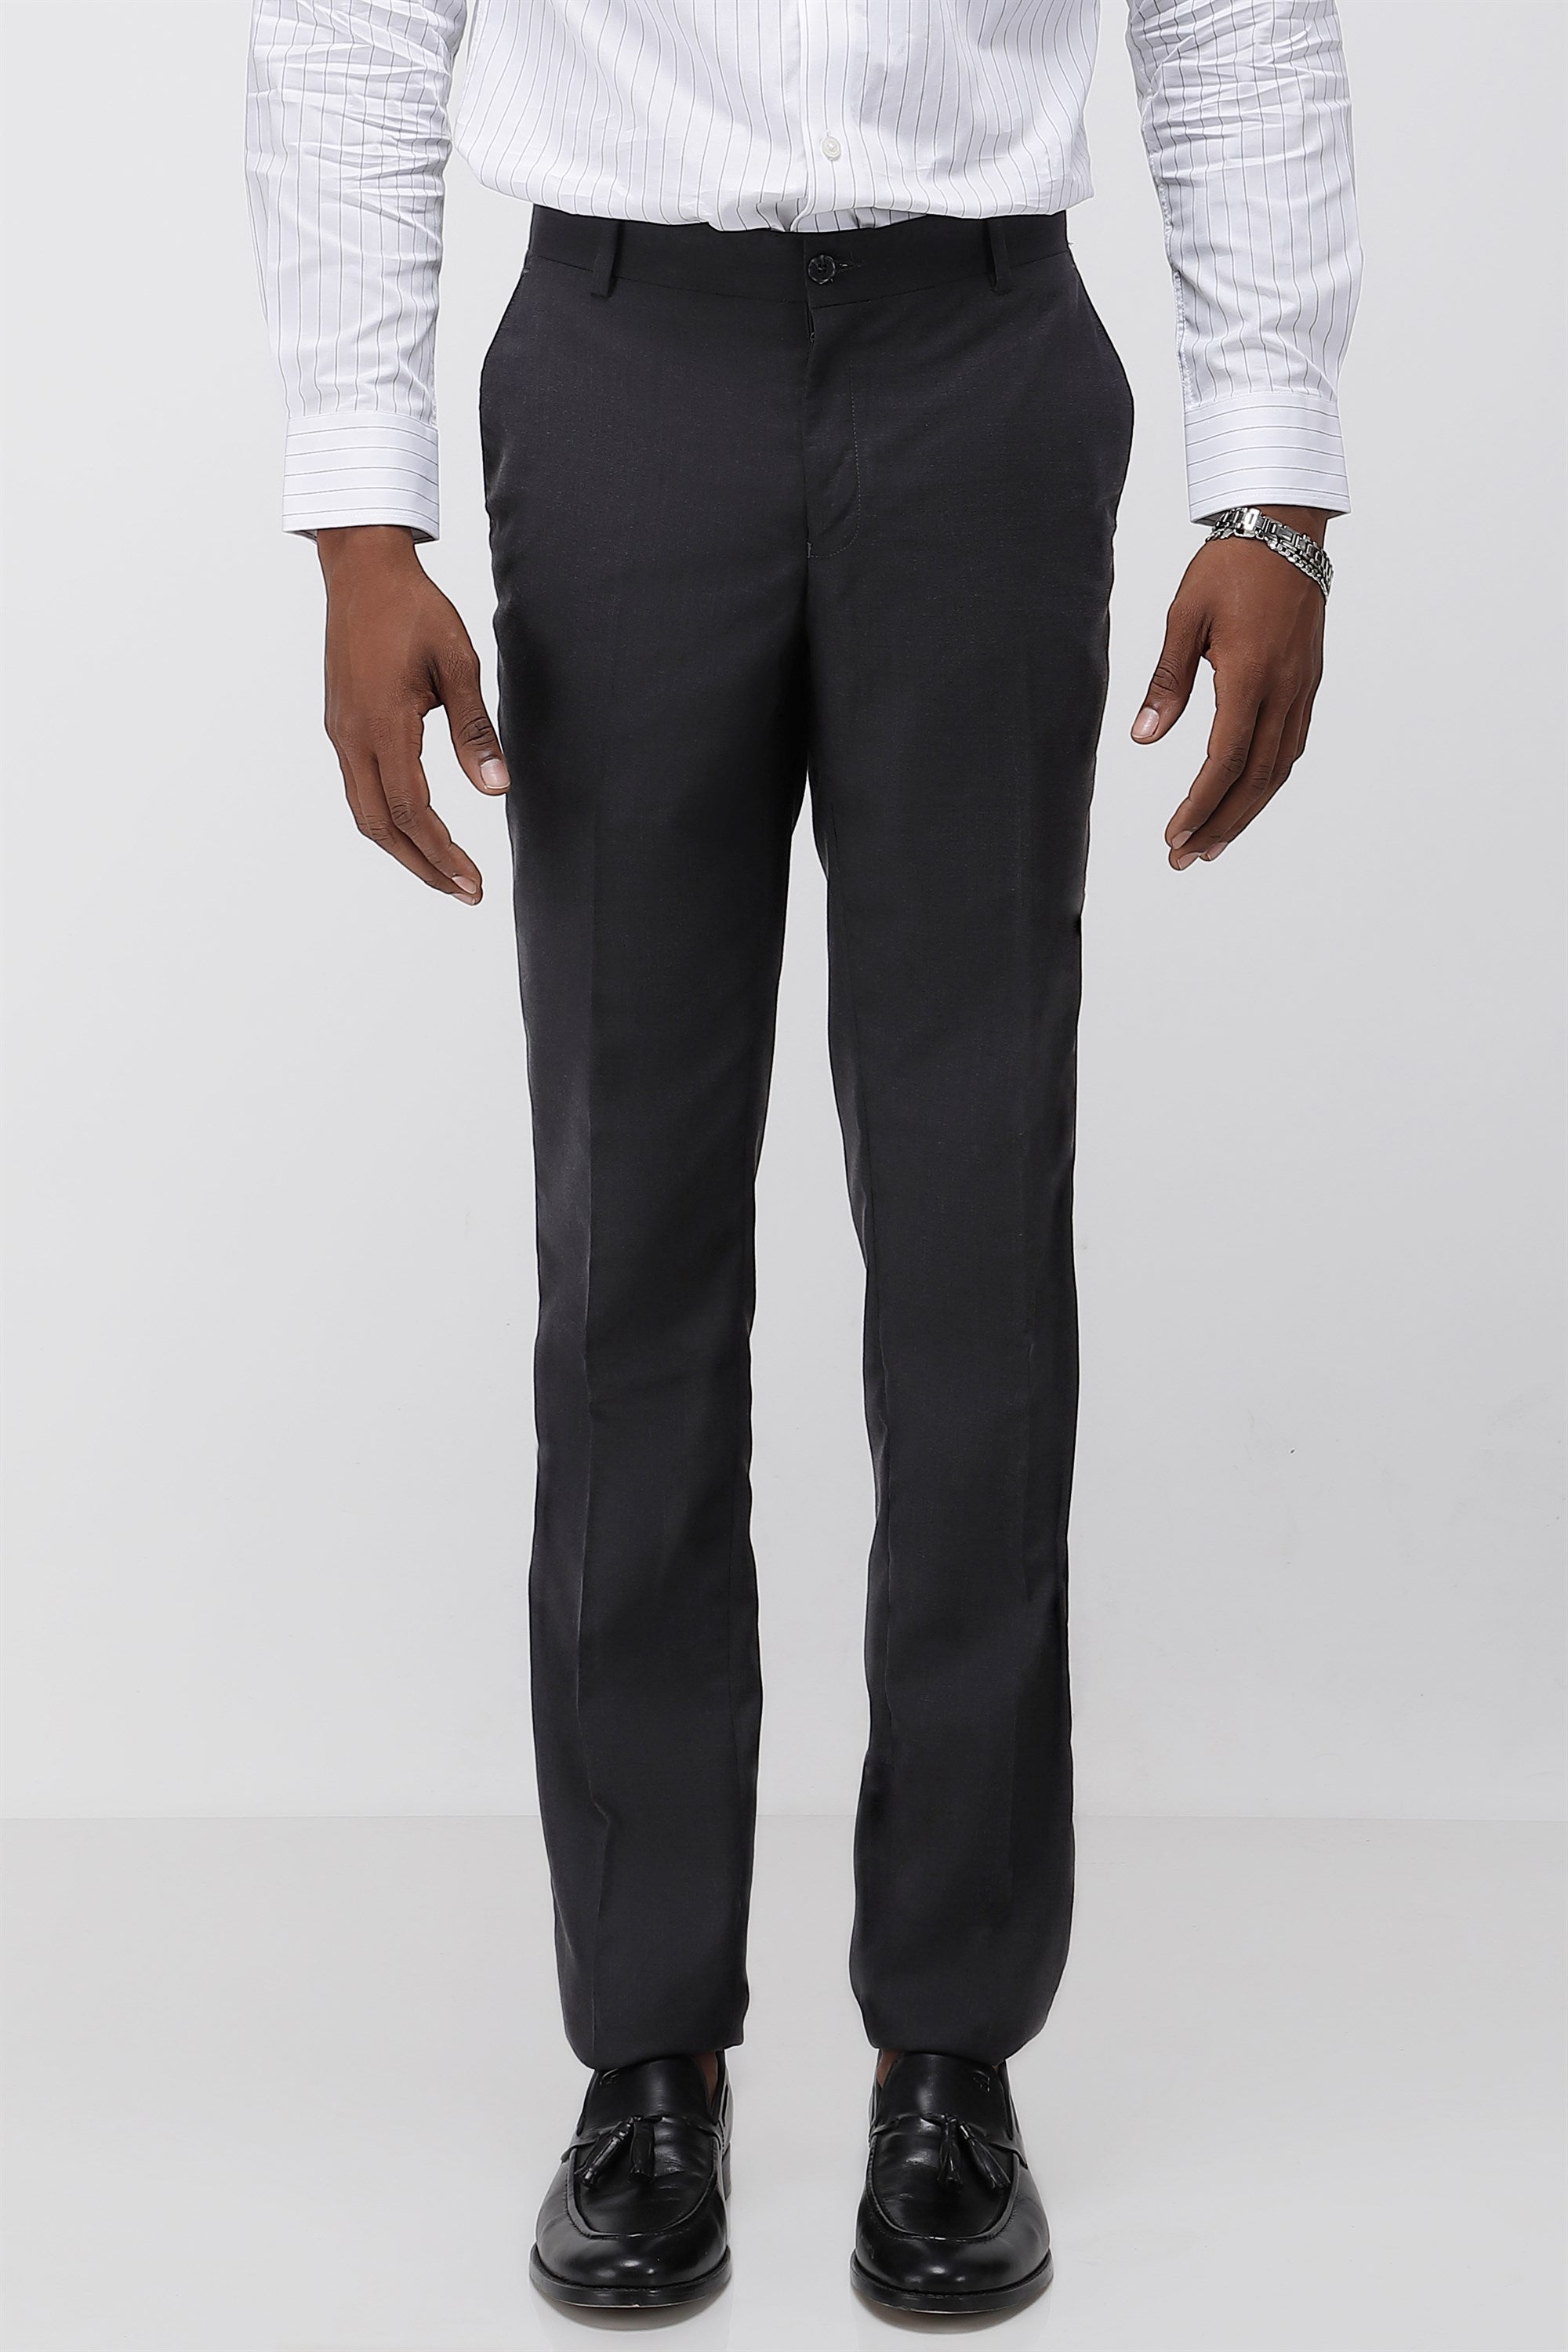 T the brand Formal Twill Flat Front Trouser - Black